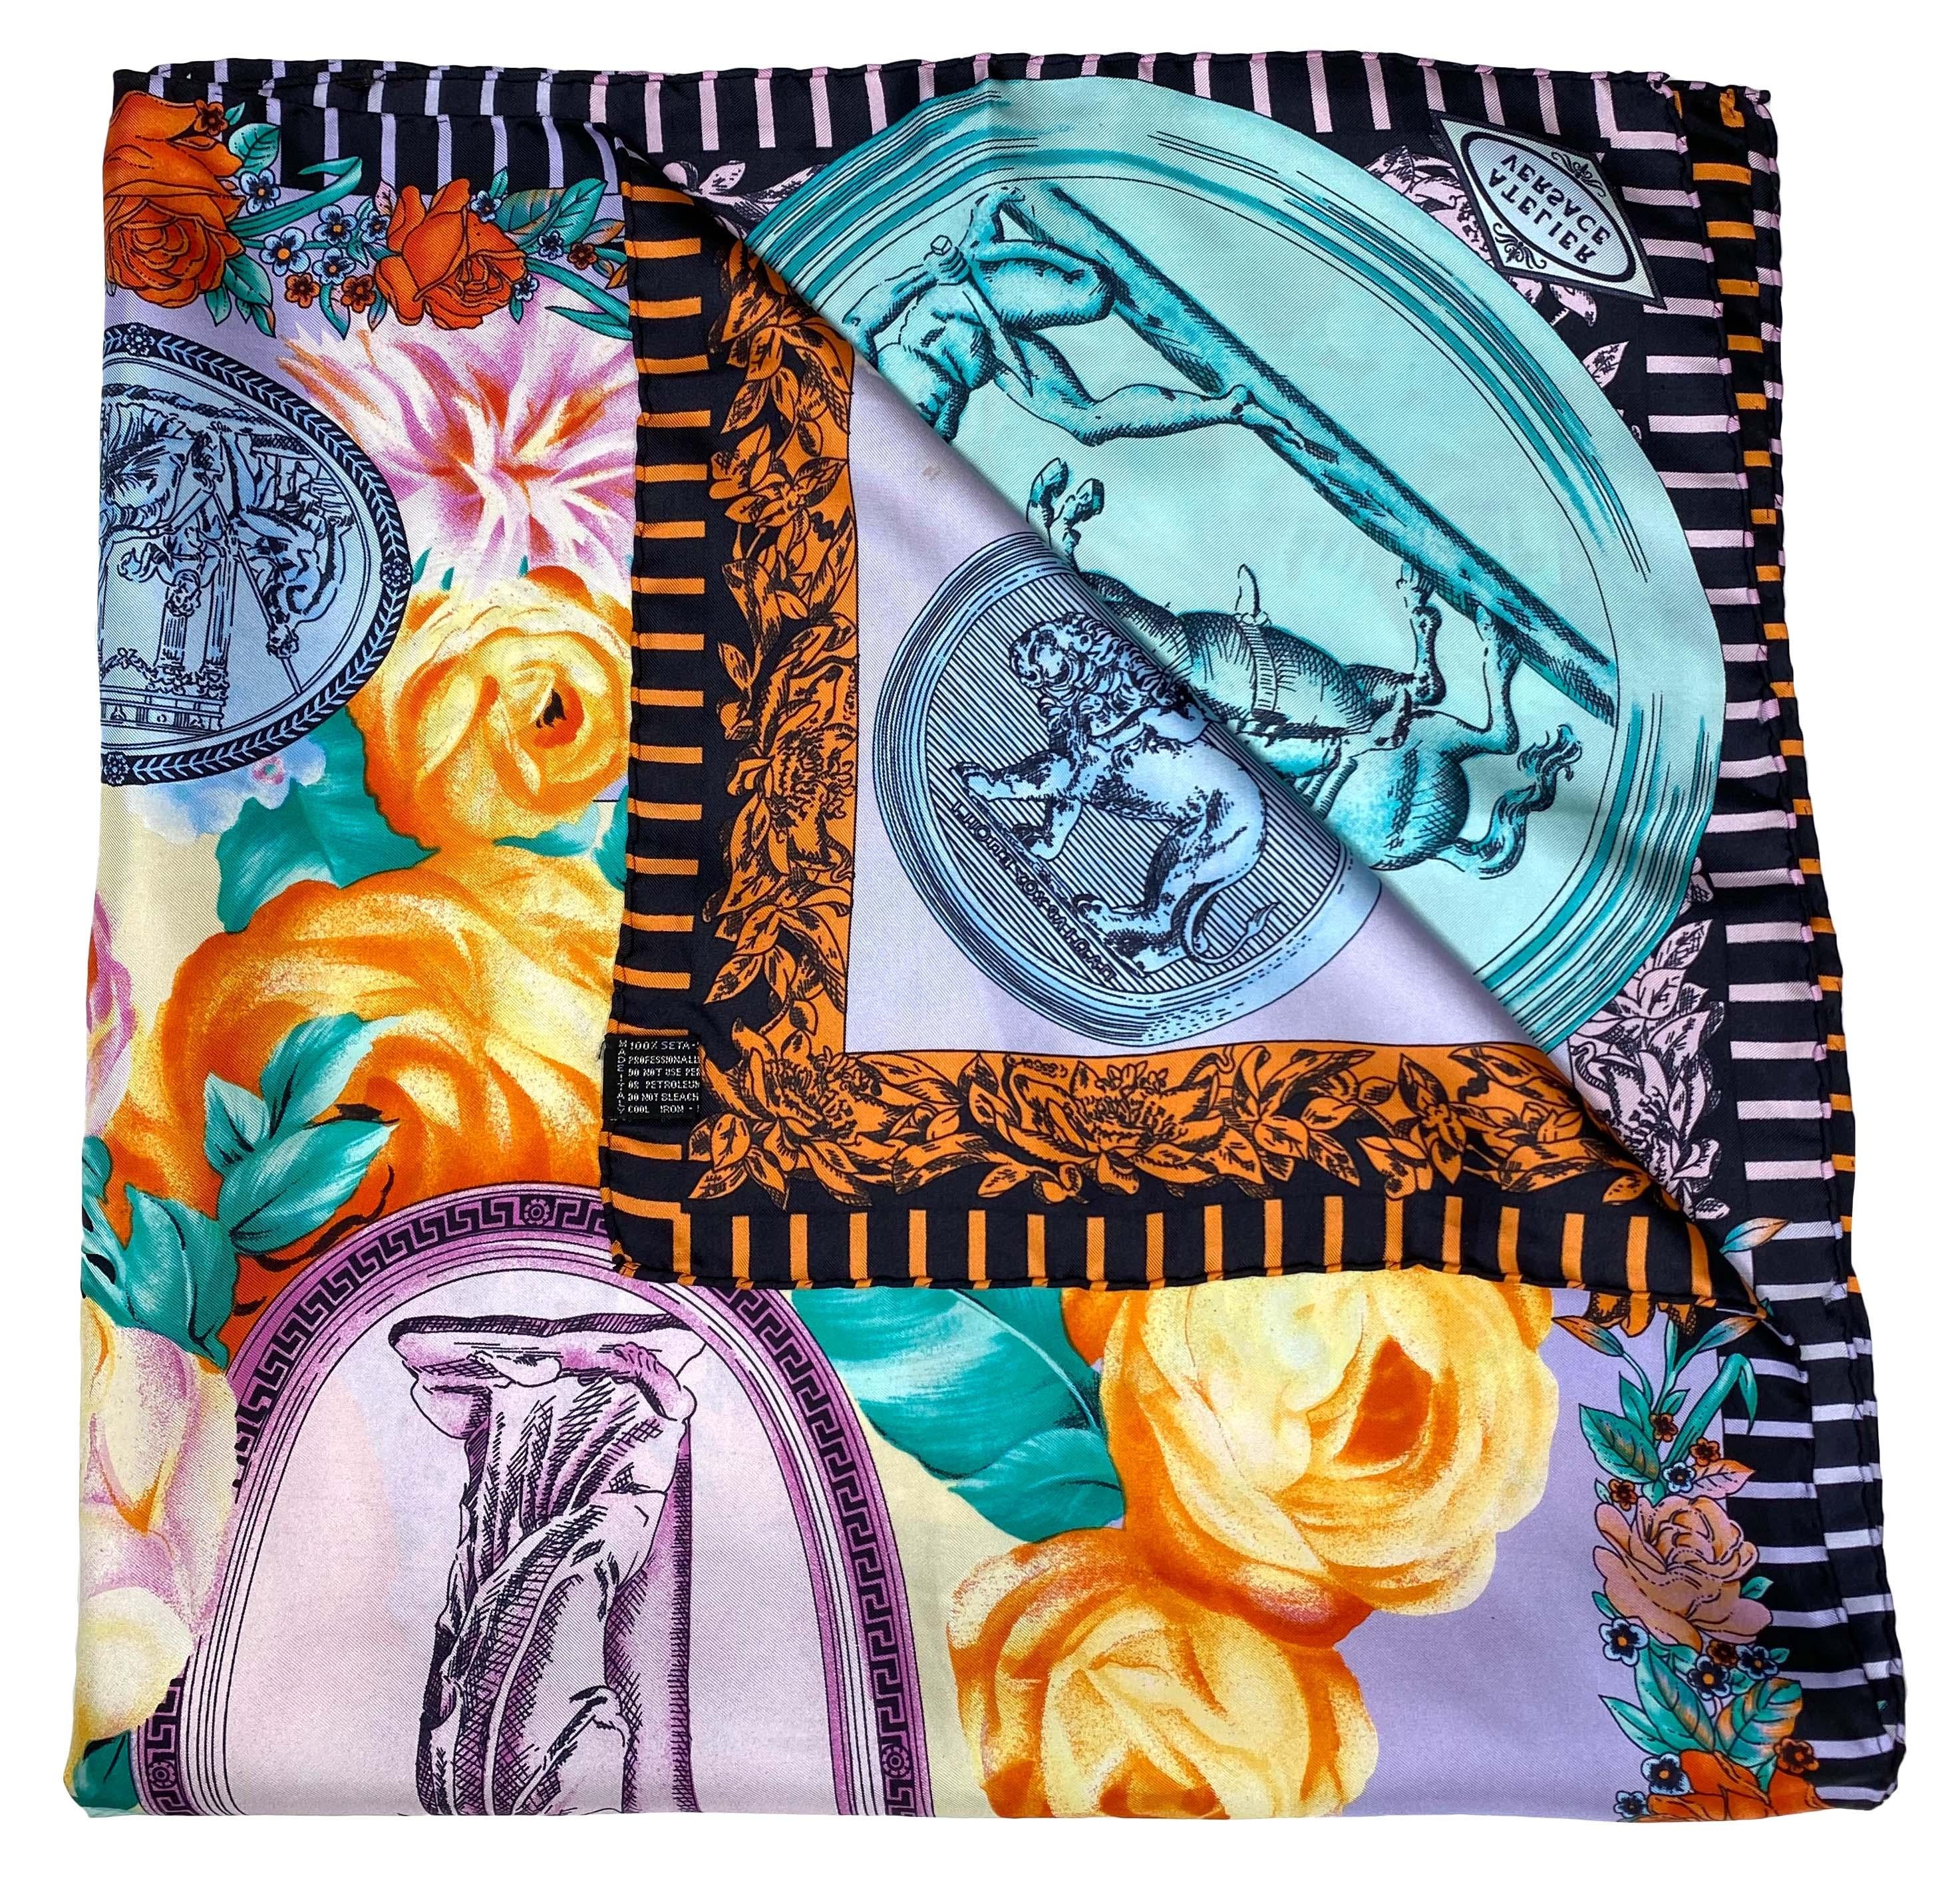 Presenting a beautiful baroque Atelier Versace square silk scarf, designed by Gianni Versace. This scarf features pastel colored Greek/Roman coins with ancient carved scenes and multicolored flowers. 
